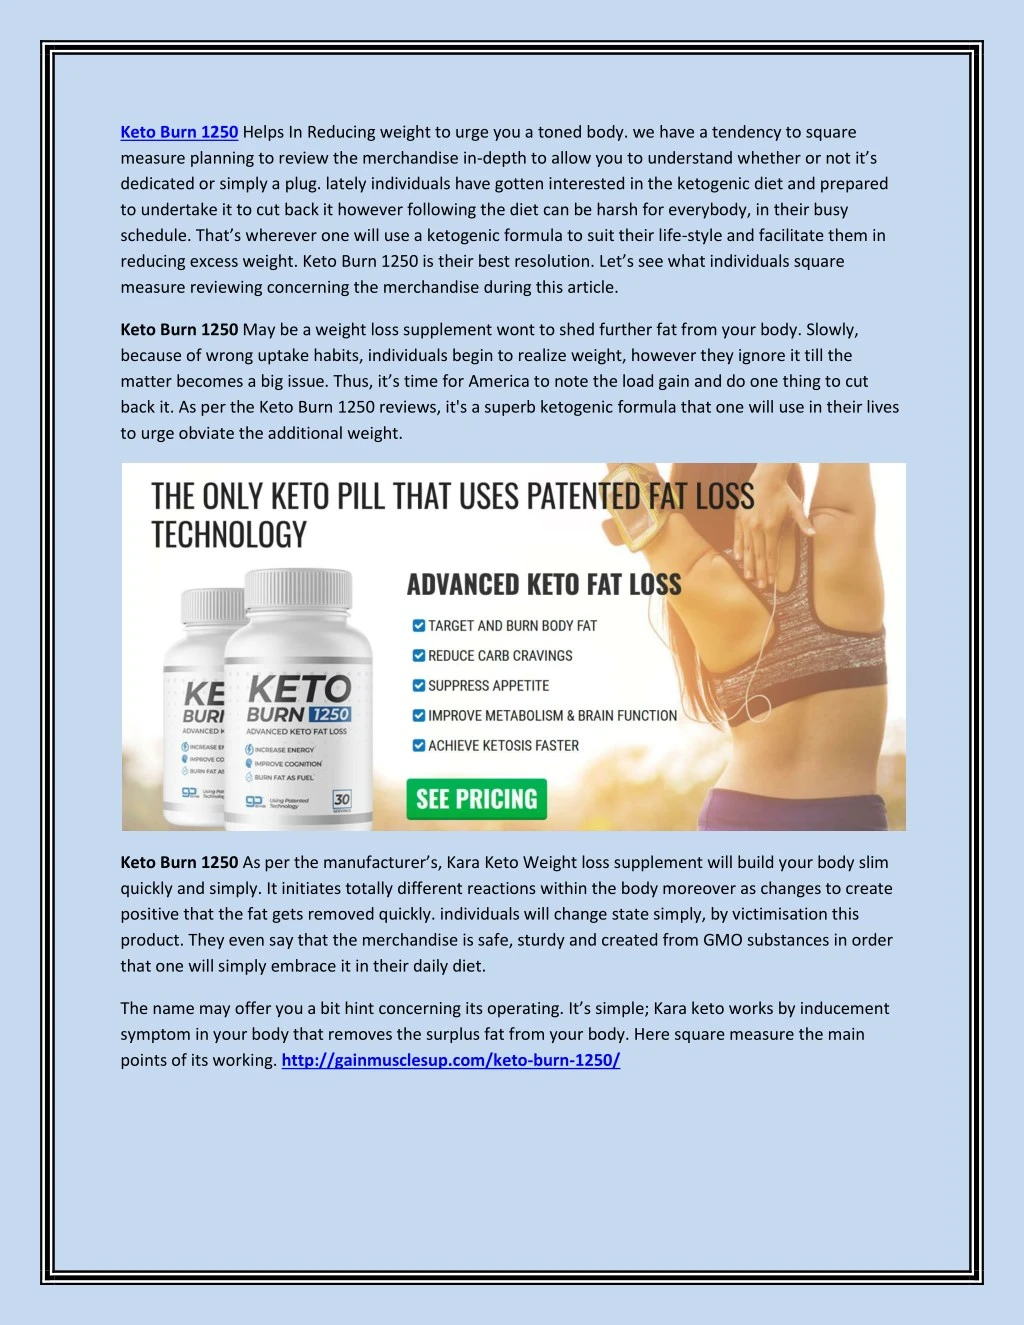 keto burn 1250 helps in reducing weight to urge